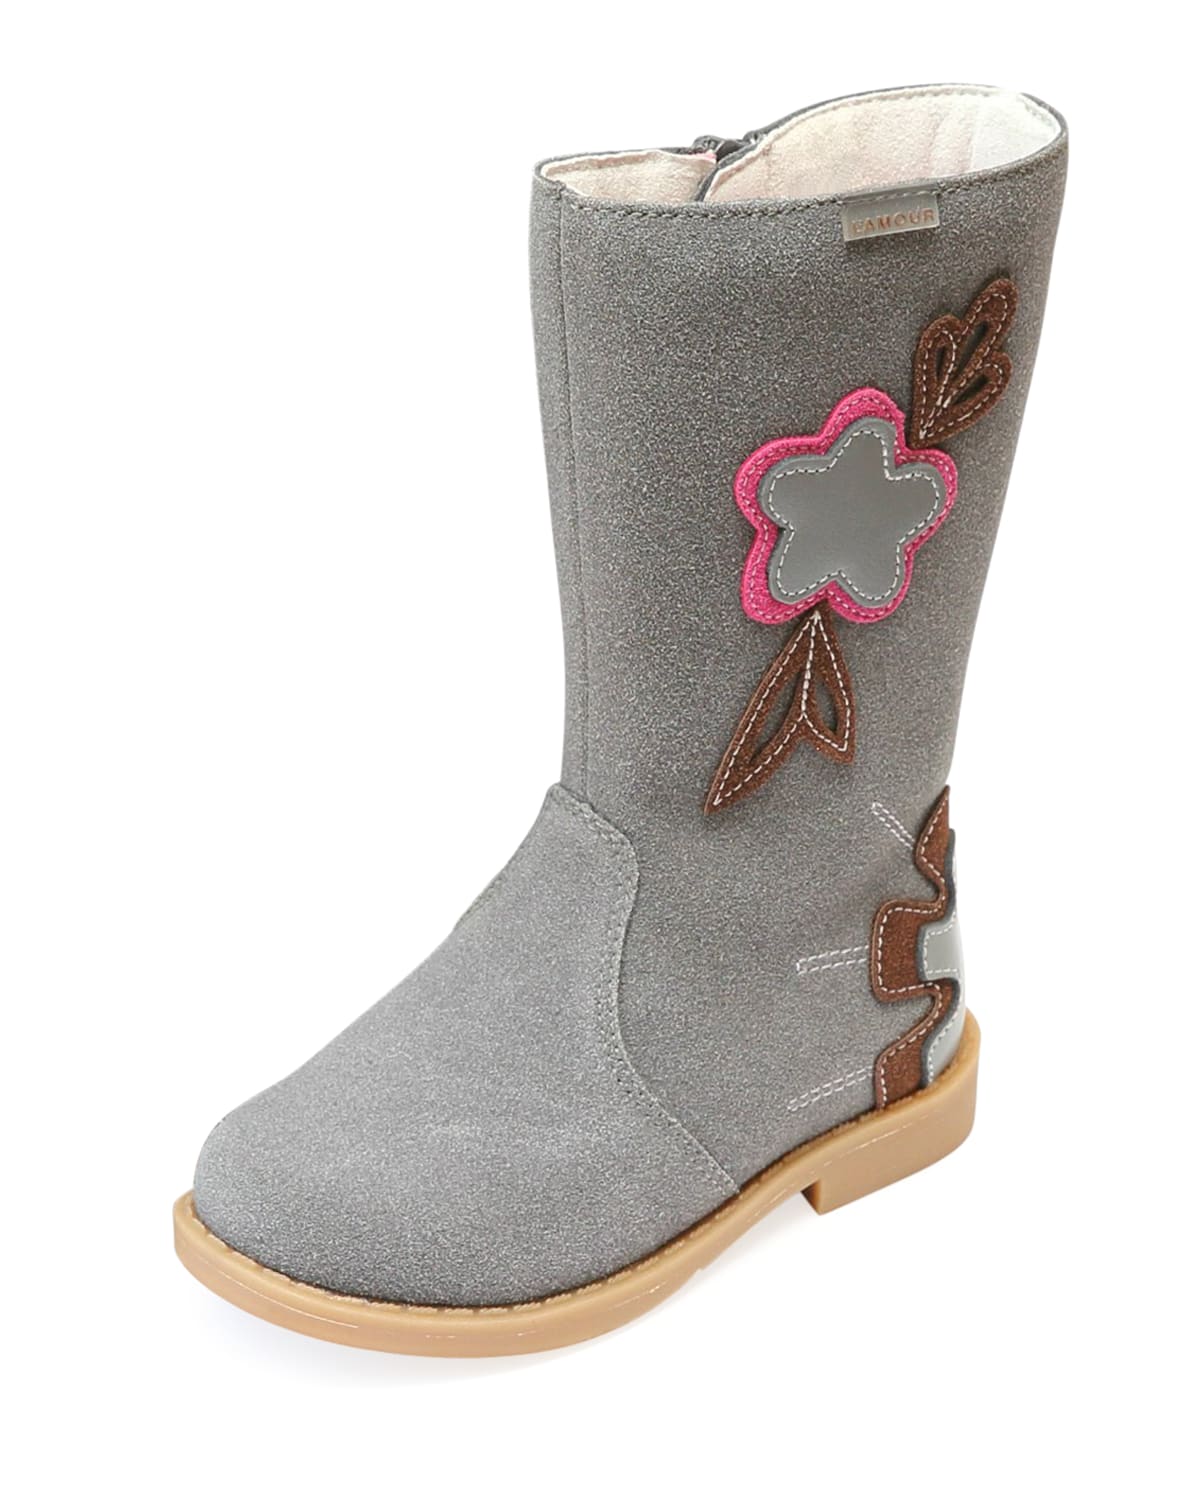 L'amour Shoes Fiore Tall Fashion Boot W/ Stitch Flowers, Baby/toddler/kids In Gray